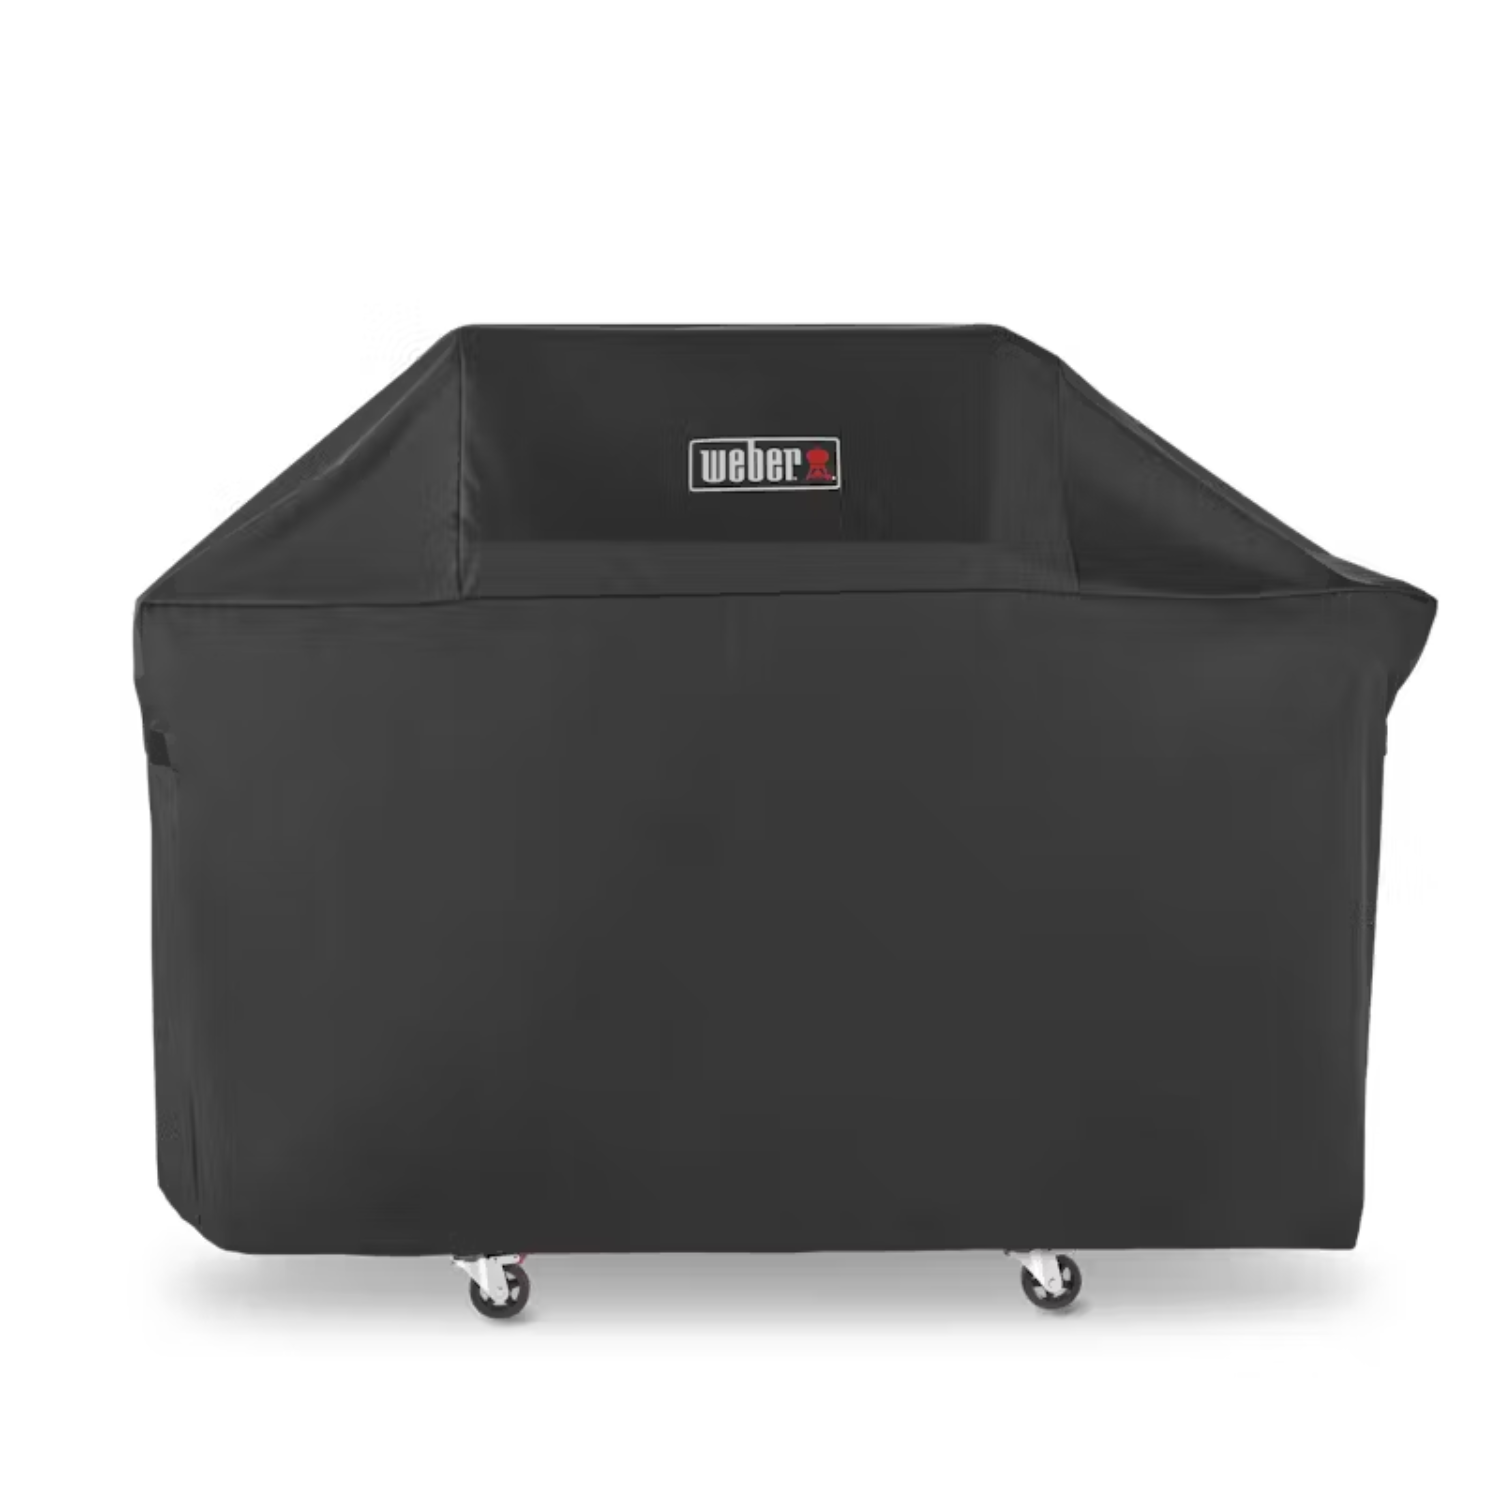 Weber Premium Grill Cover for outdoor barbecuing at MeatKing.hk1